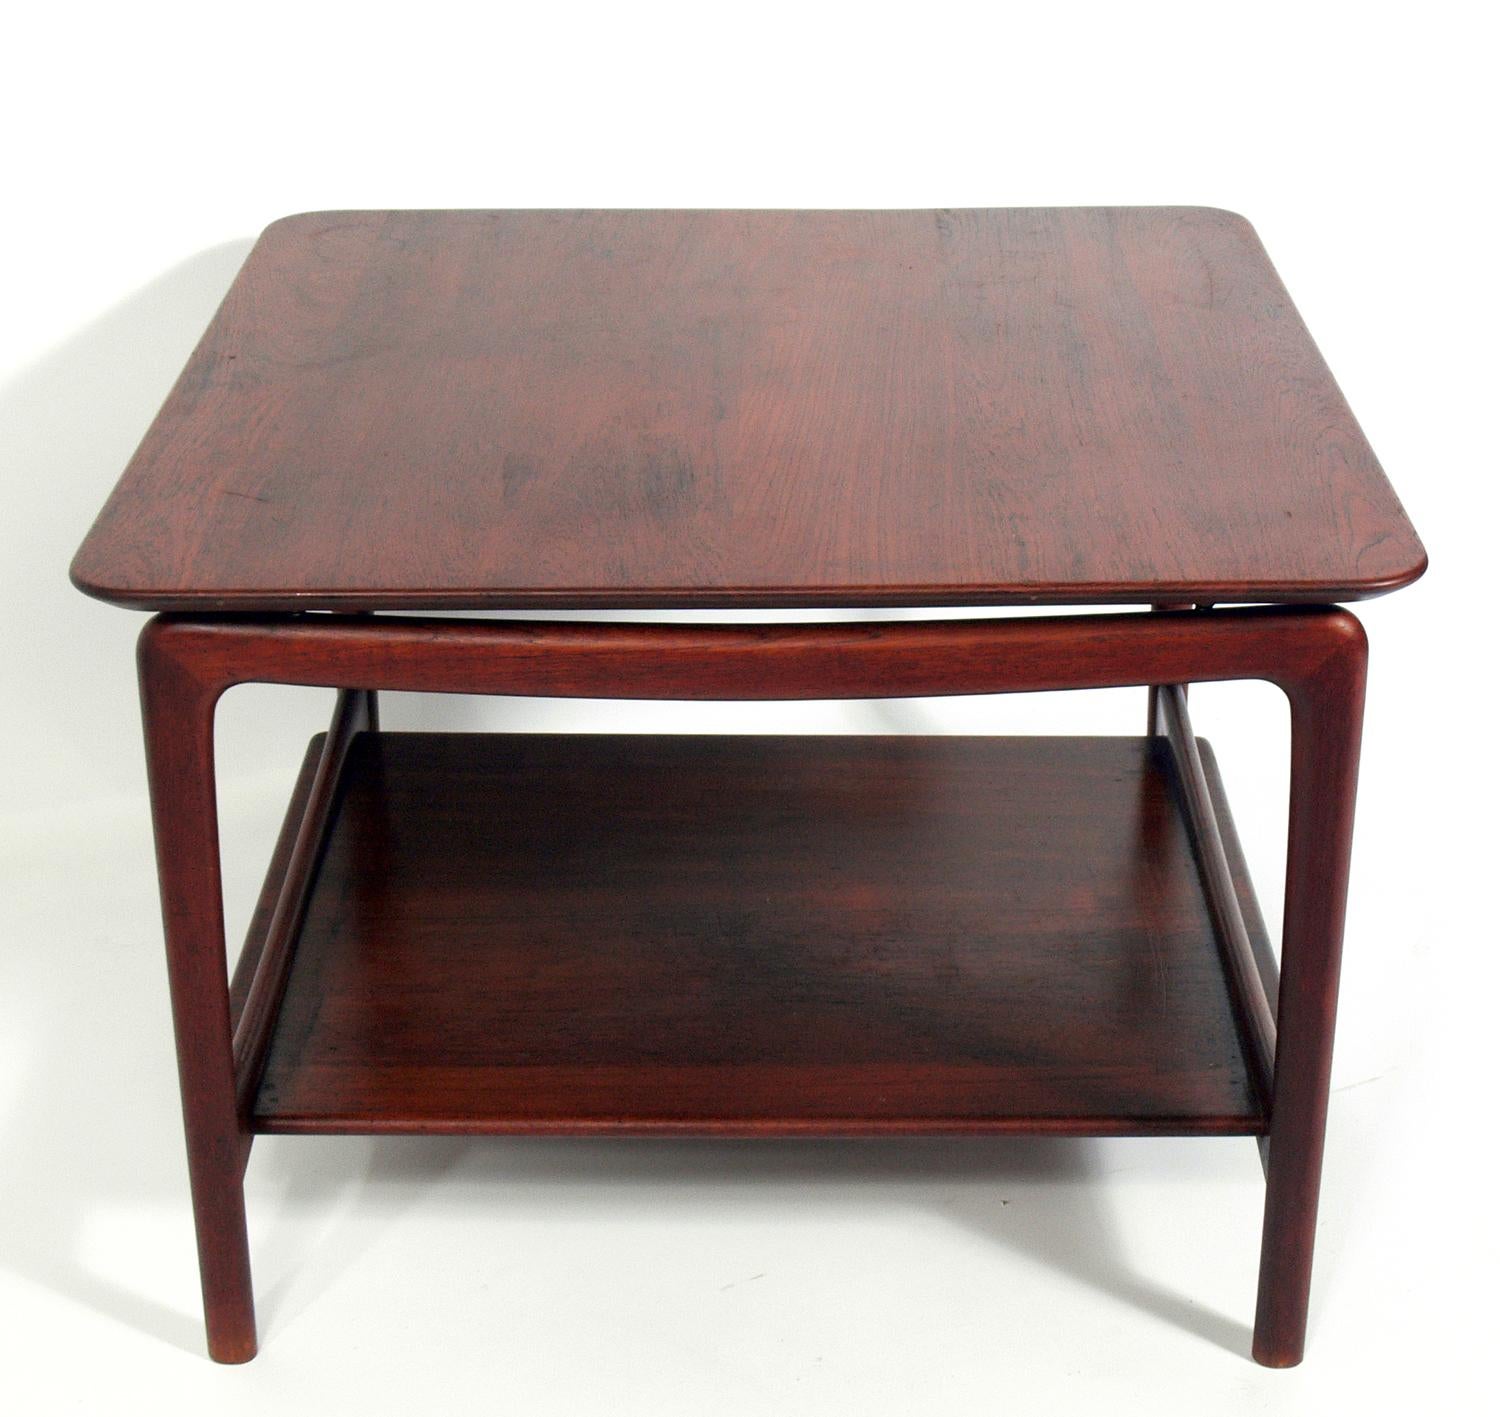 Danish modern coffee table, designed by Peter Hvidt, Denmark, circa 1960s. It has recently been clean and teak oiled.